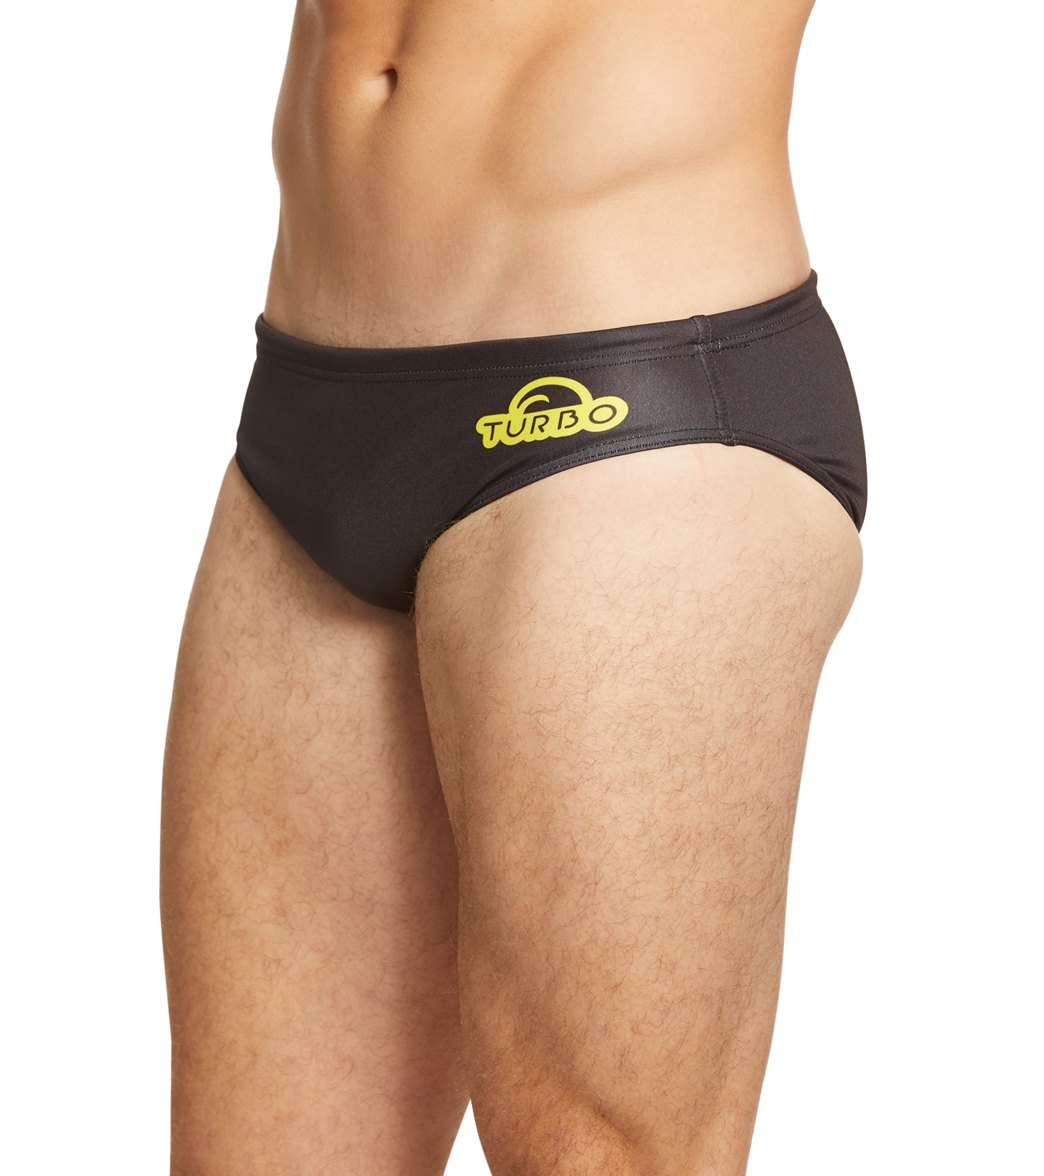 Turbo Men's Basic Water Polo Brief at SwimOutlet.com